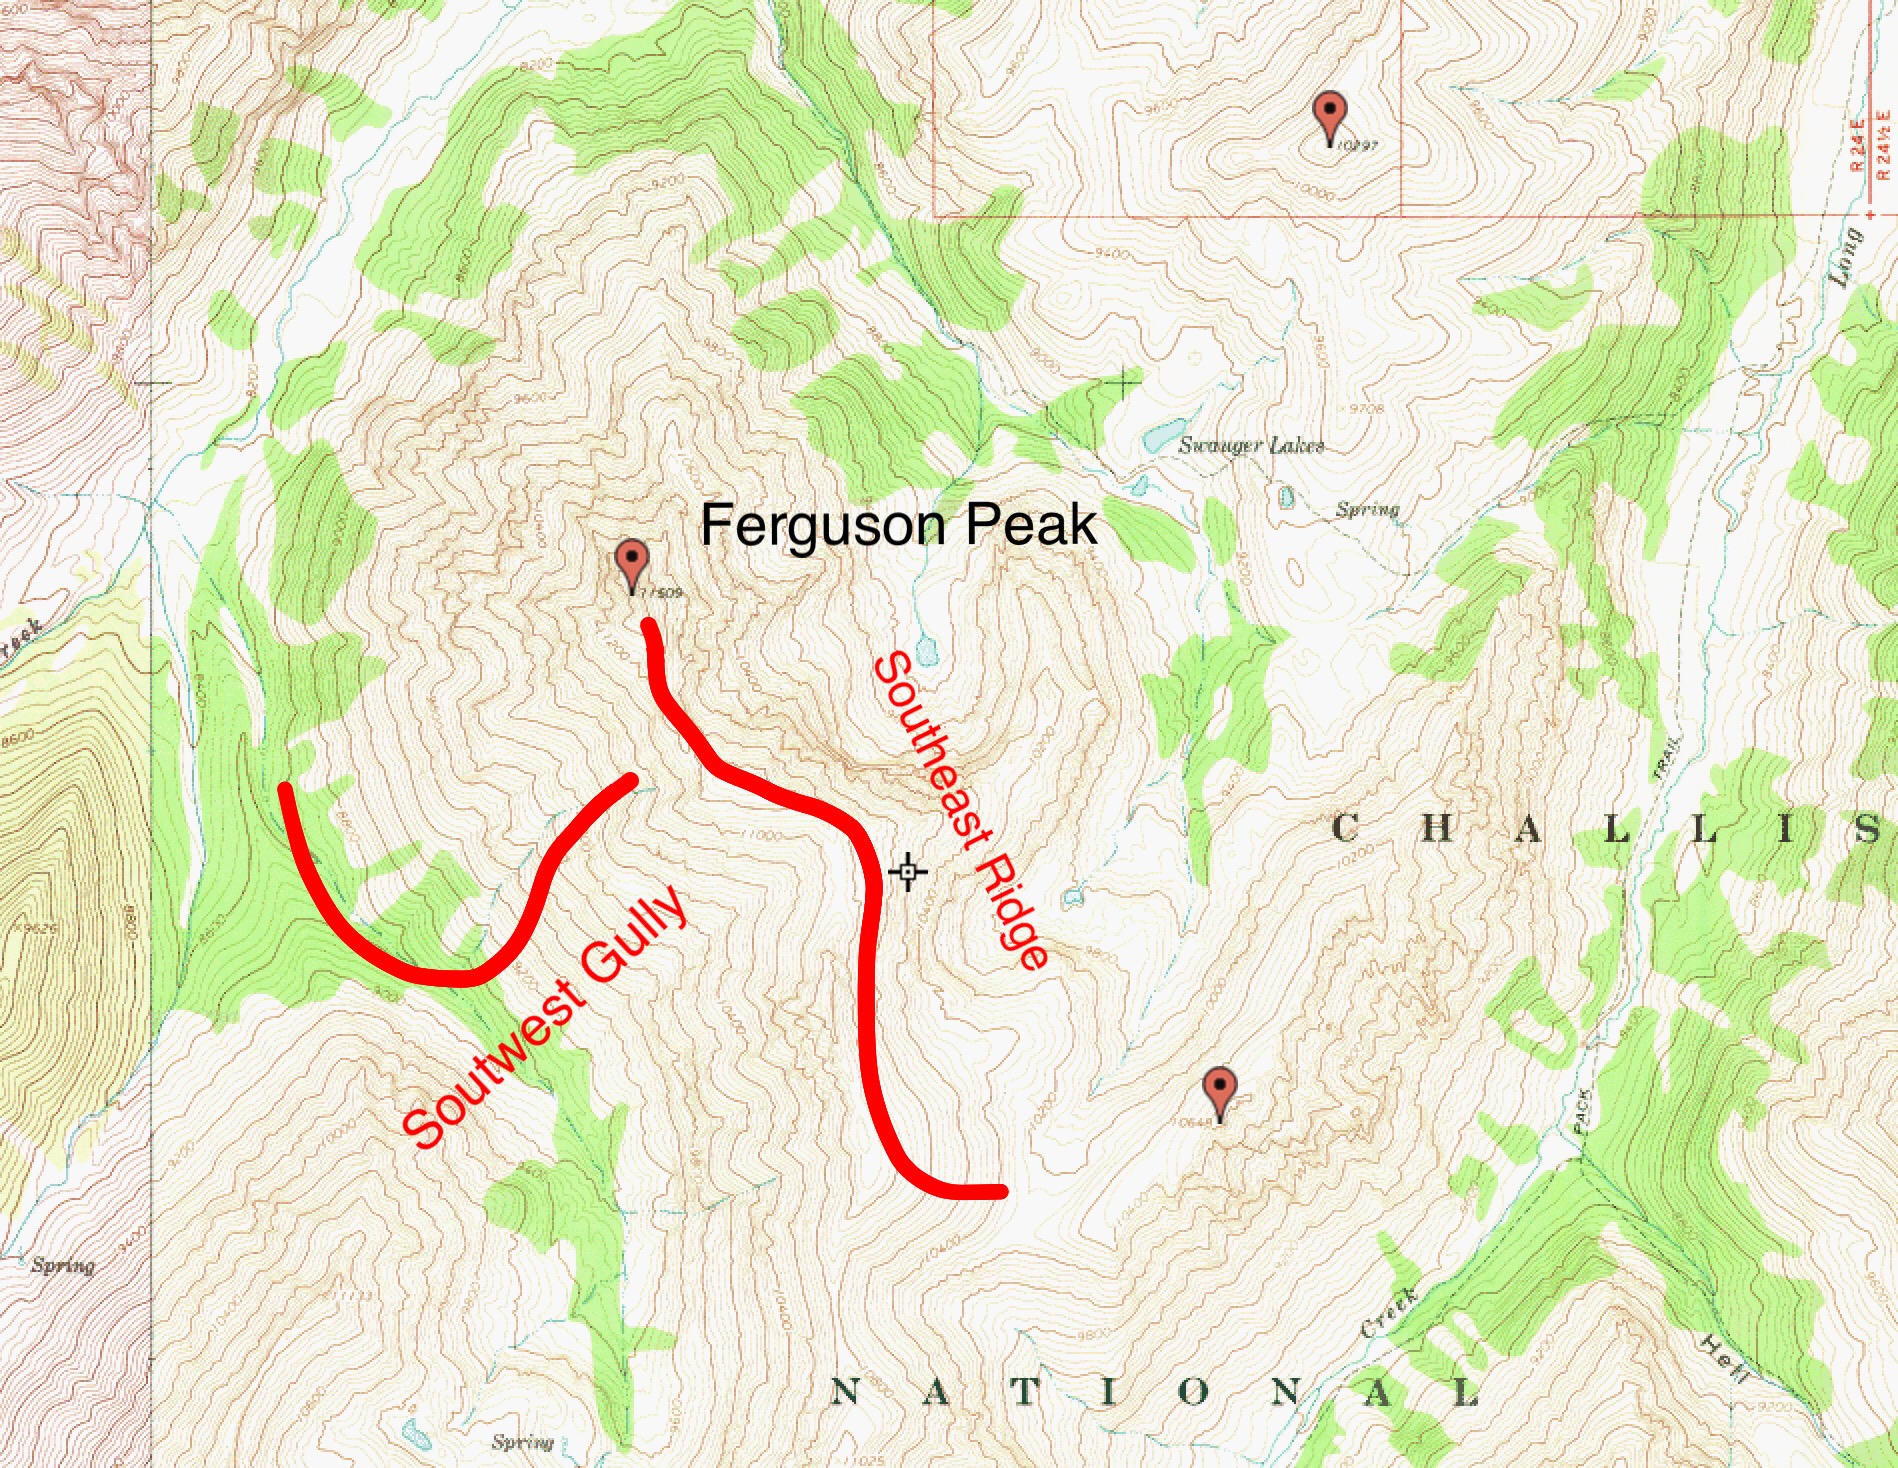 The two ascent routes in the book are shown on this map.